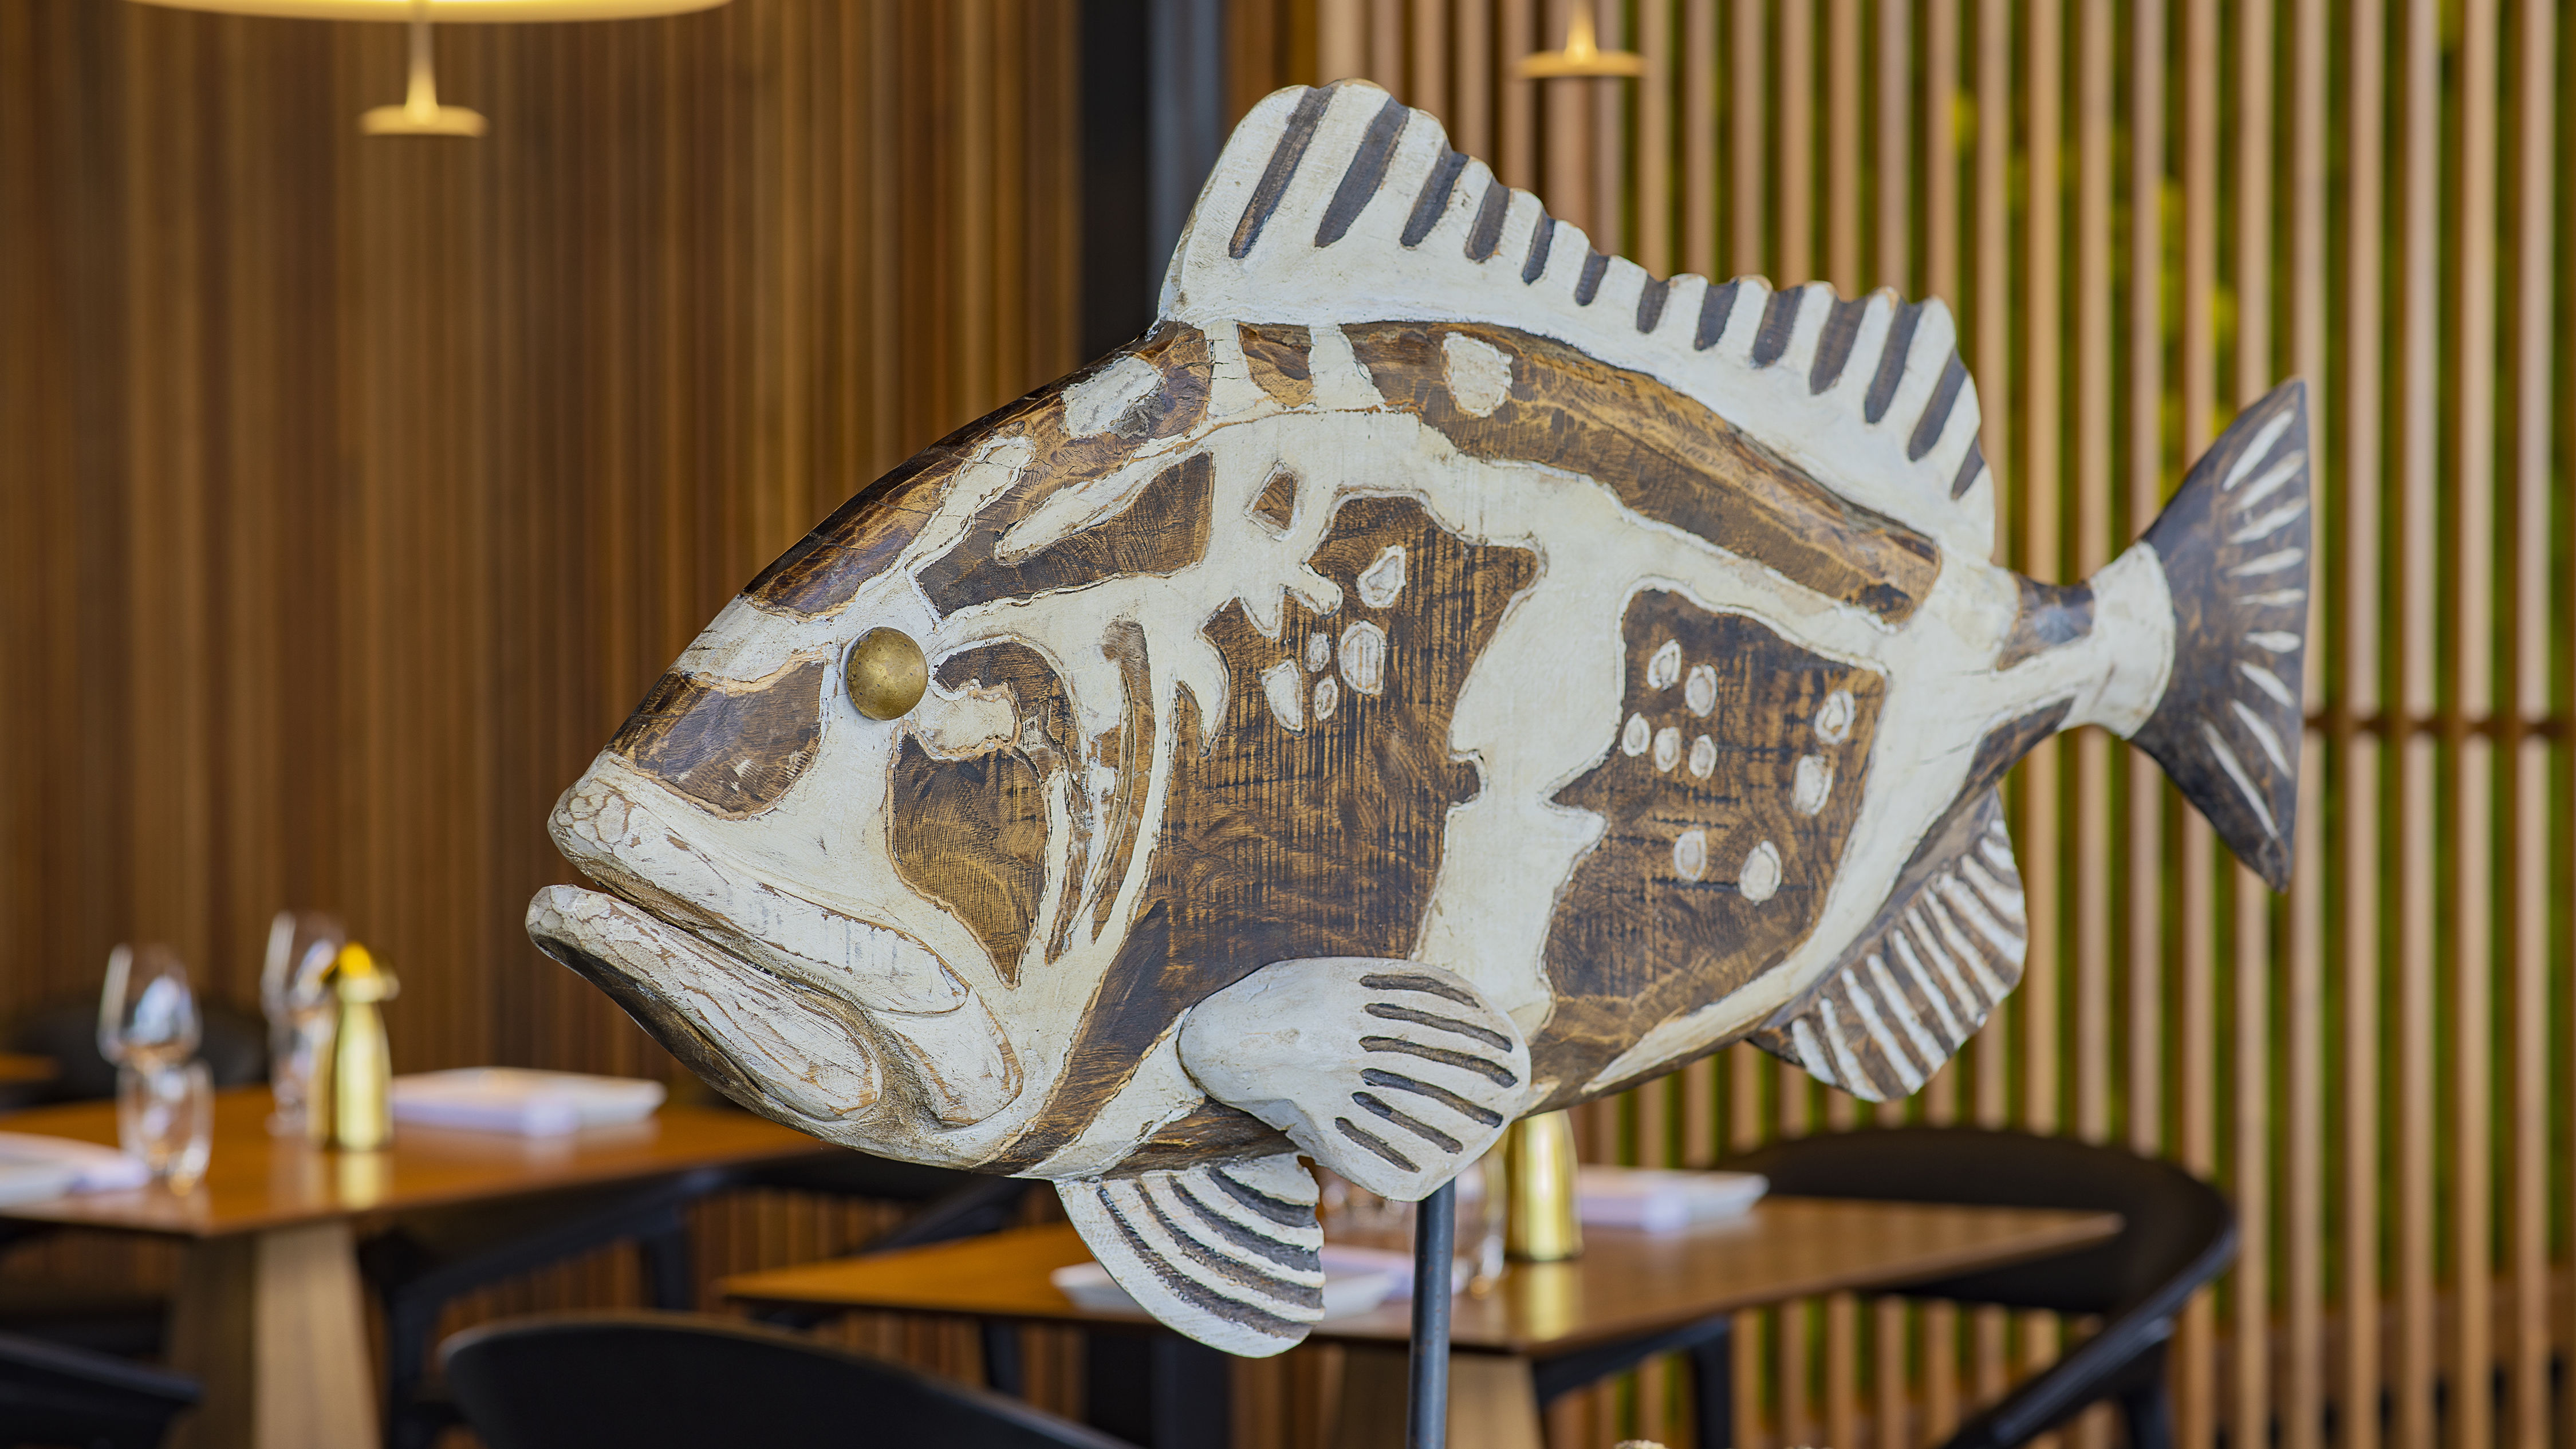 Fish Decoration in a Restaurant